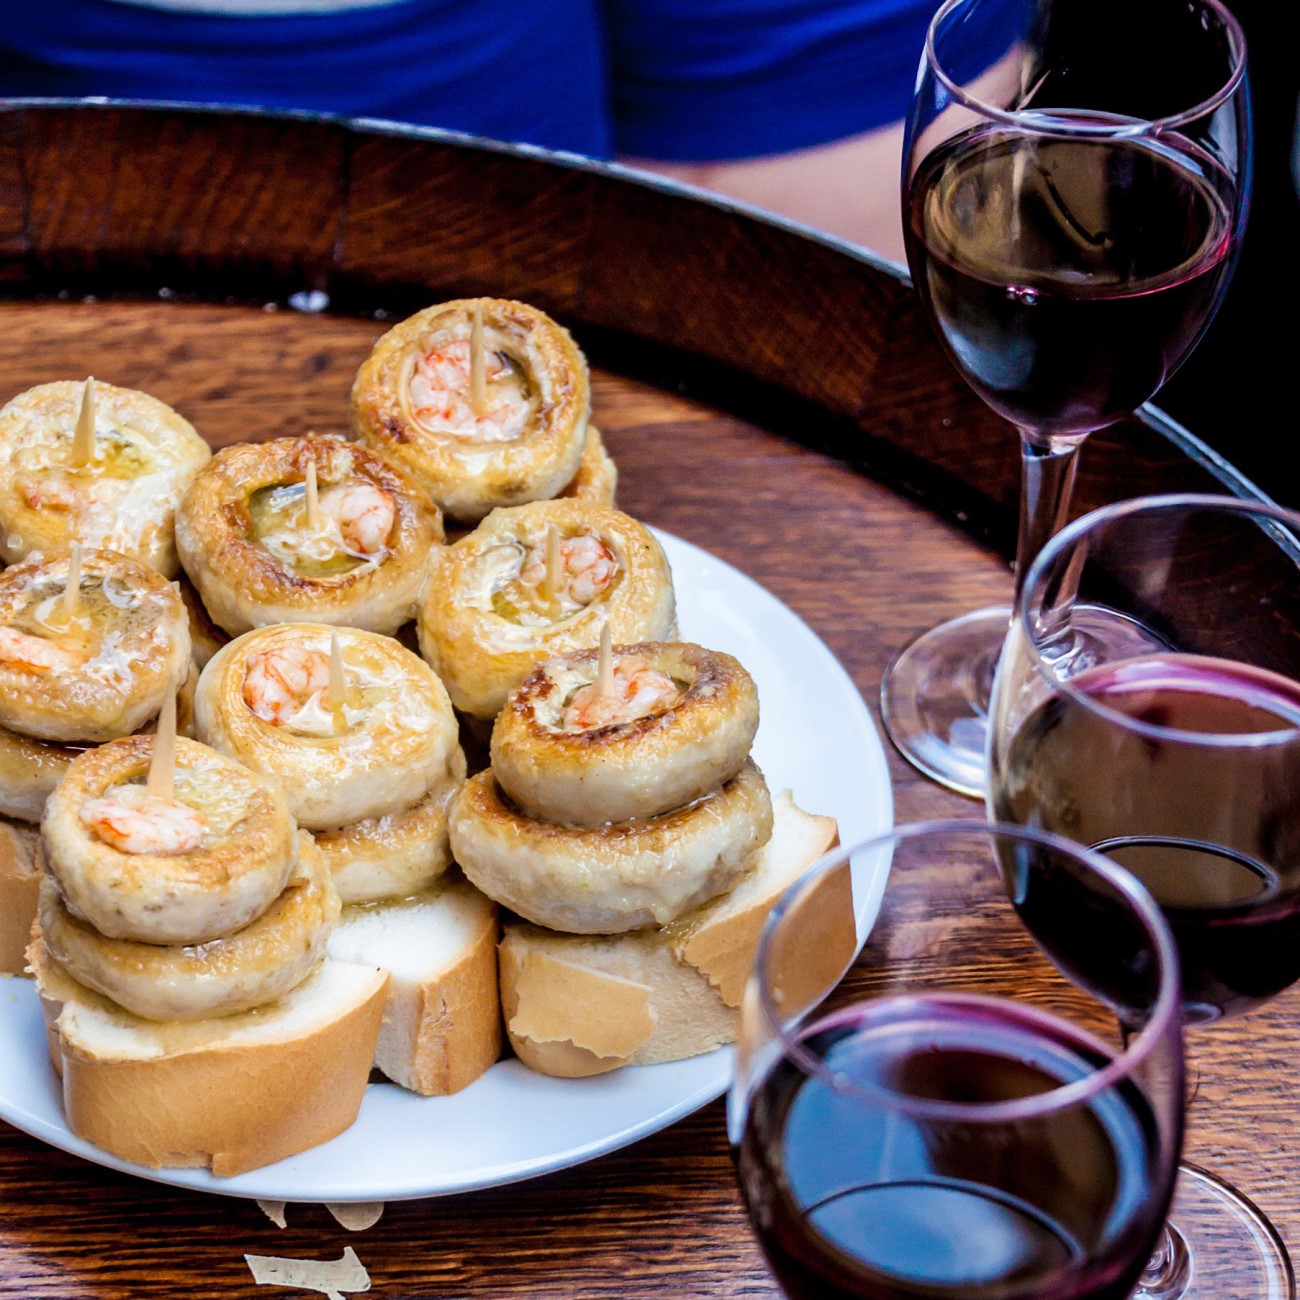 One type of traditional spanish tapas: mushrooms with shrimps and red wine, Bar Soriano, Calle Laurel, Logrono, La Rioja region, Spain